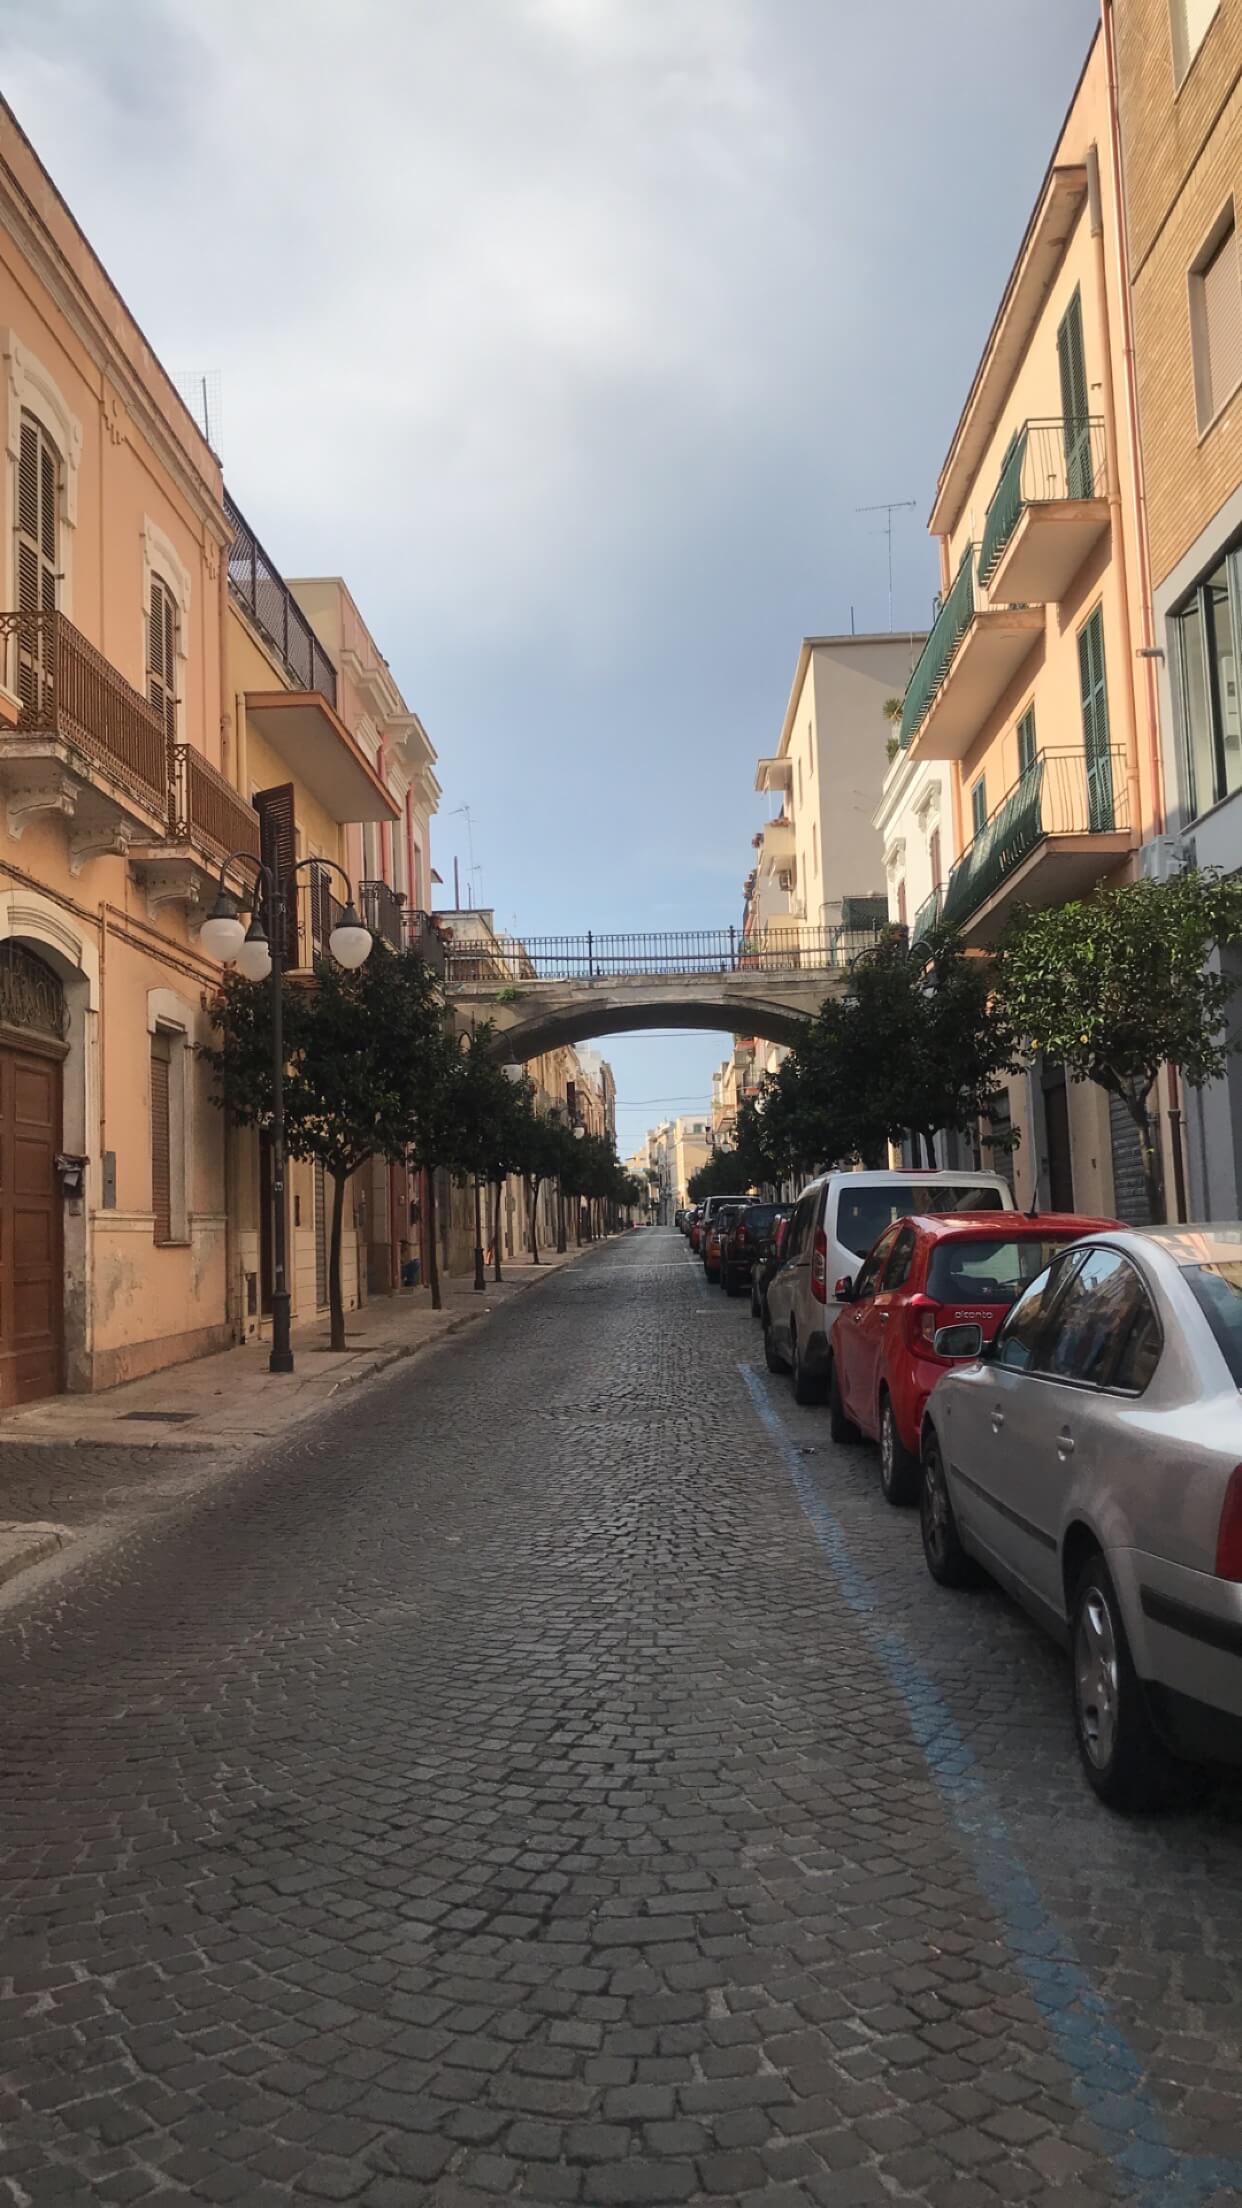 Brindisi Italy street with multiple cars and an arch bridge for pedestrian crossing and green trees among buildings